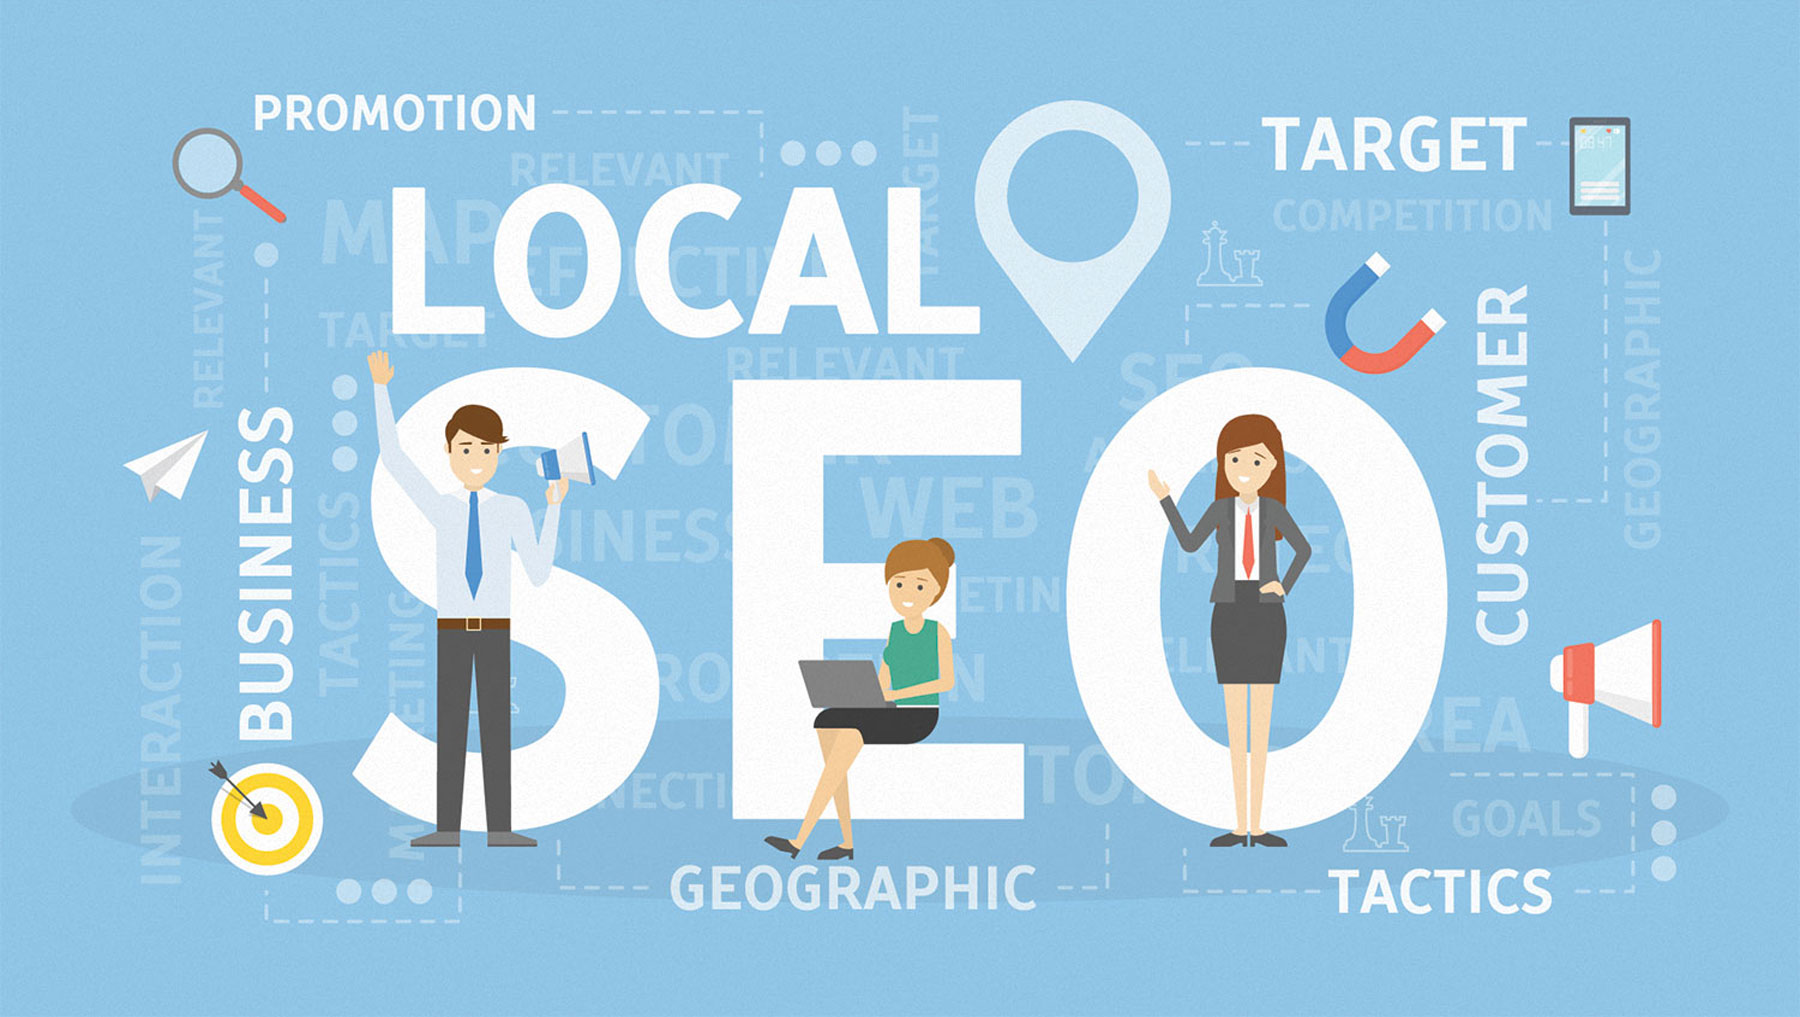 Local SEO Guide - How to promote business locally | Blog | Digitec Intl